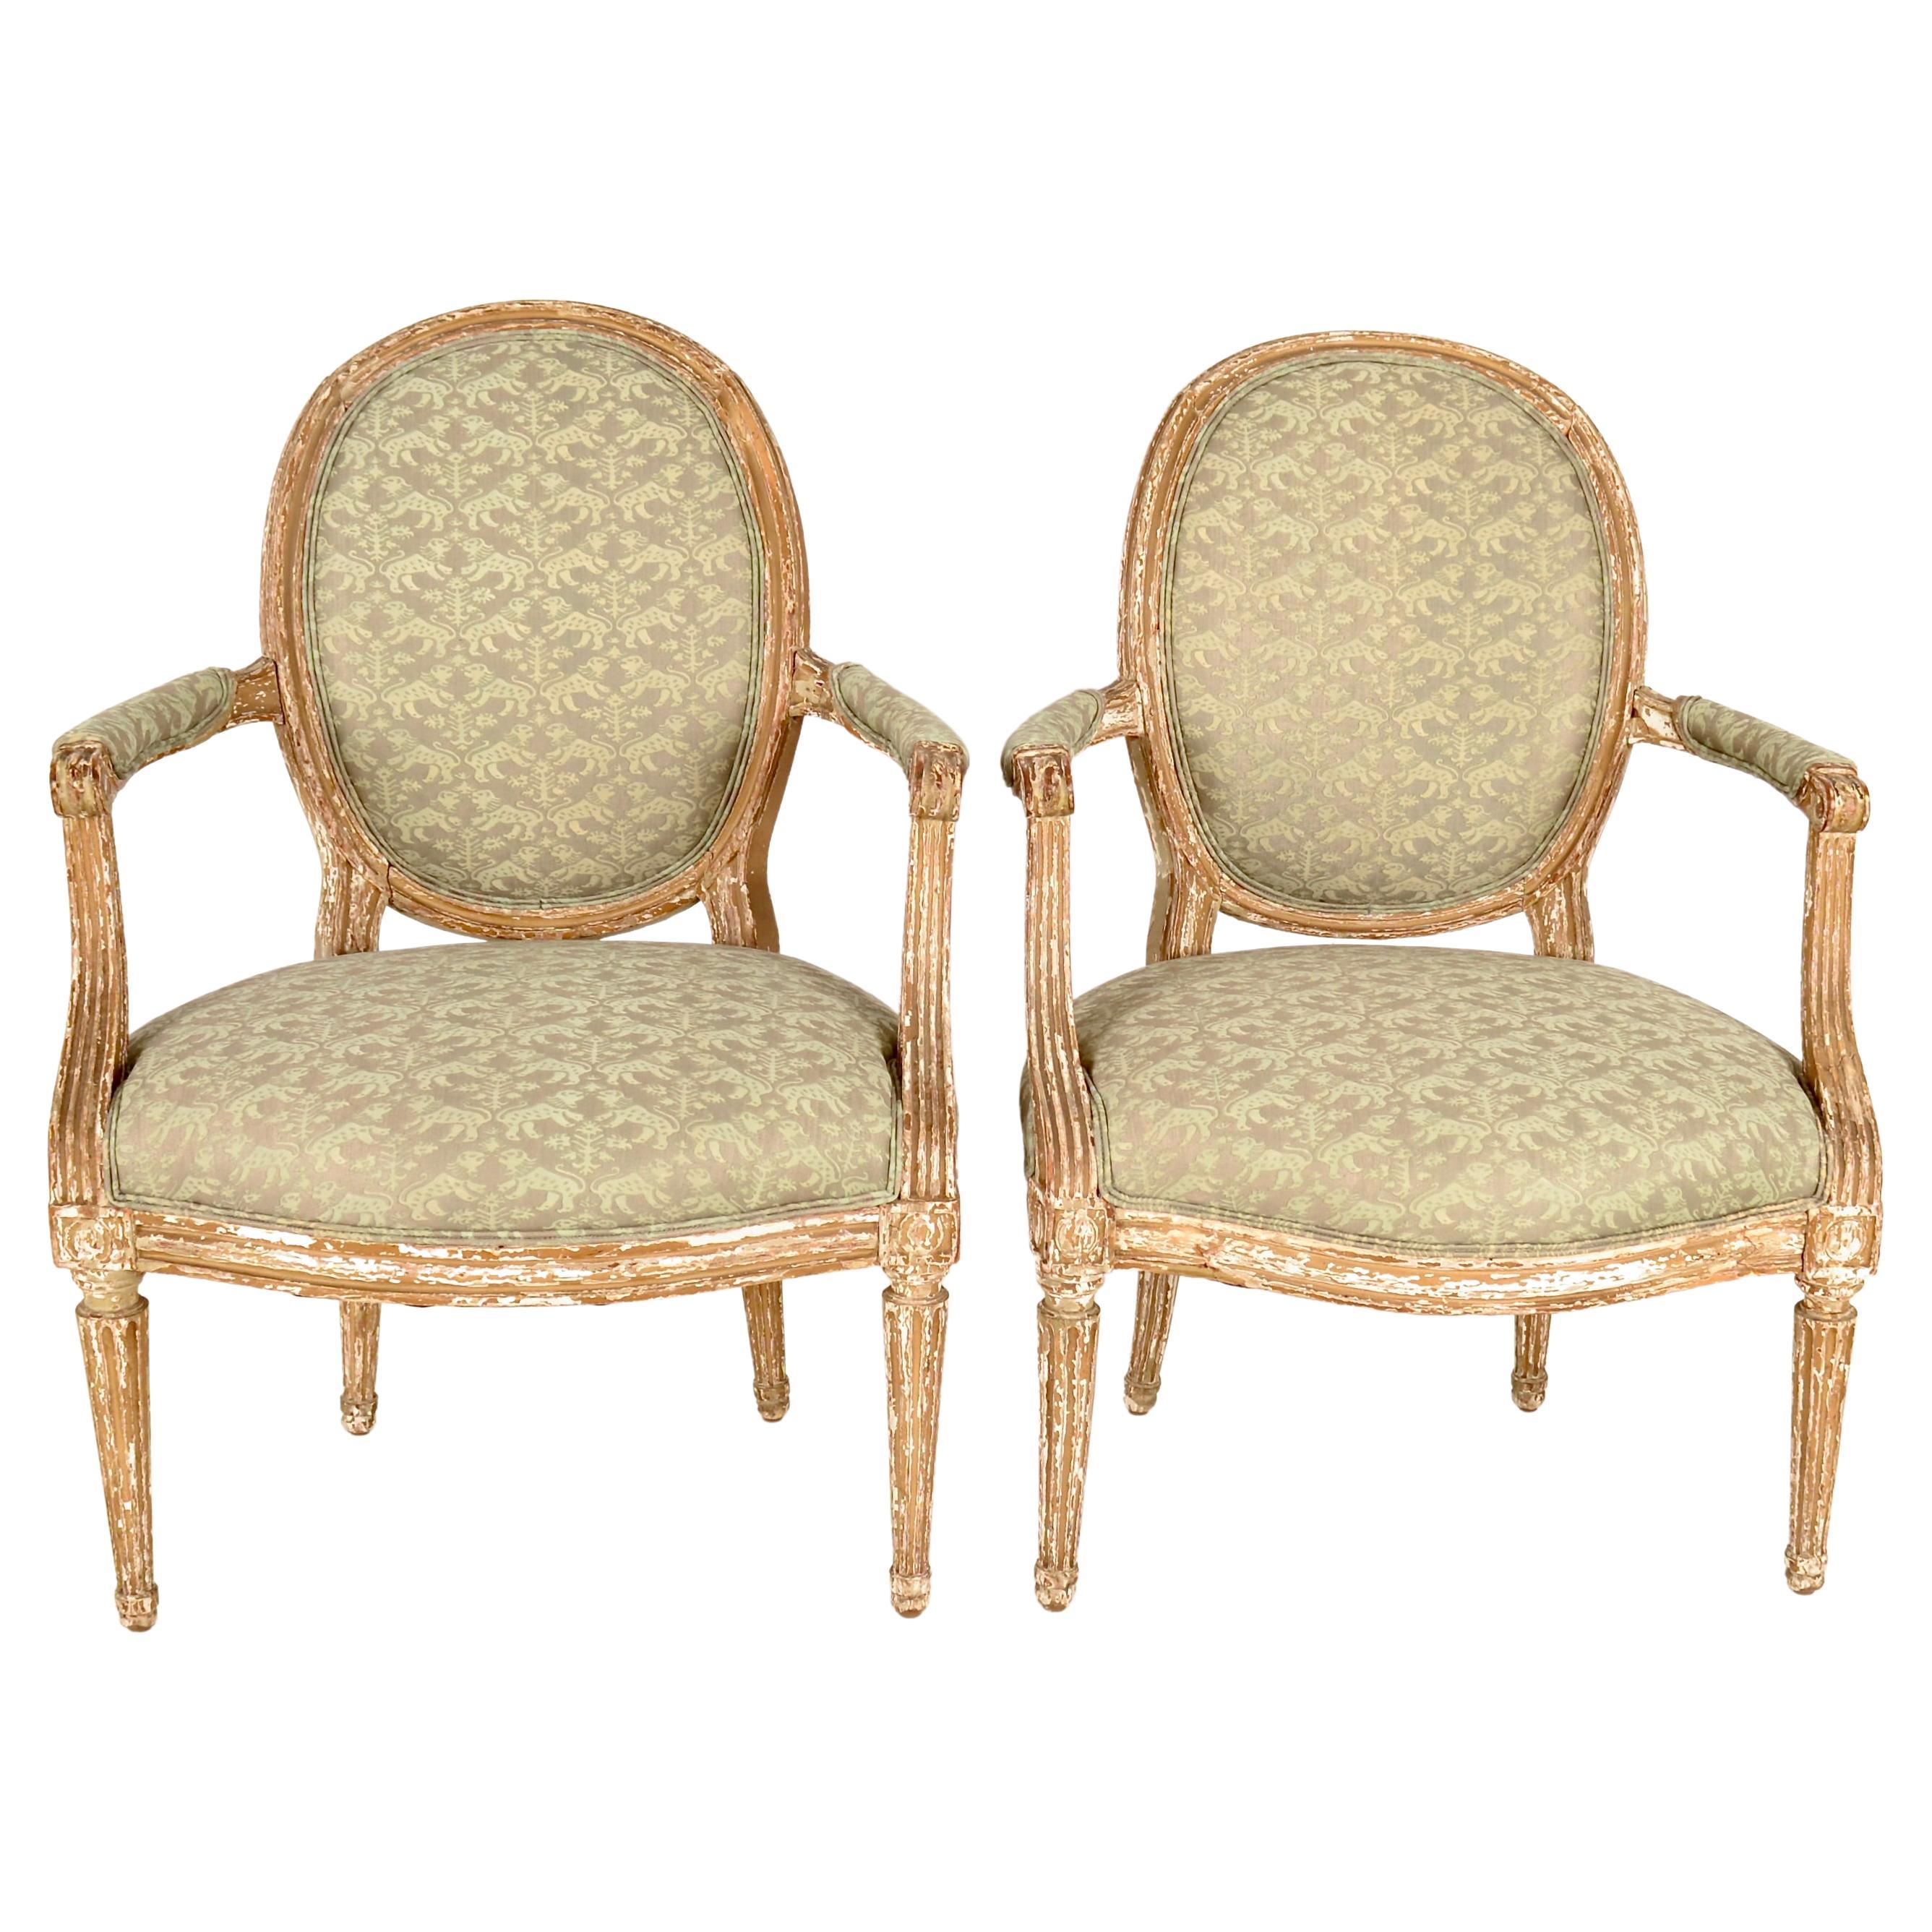 Pair of 19th c French Fauteuil Newly Upholstered in Fortuny Fabric For Sale